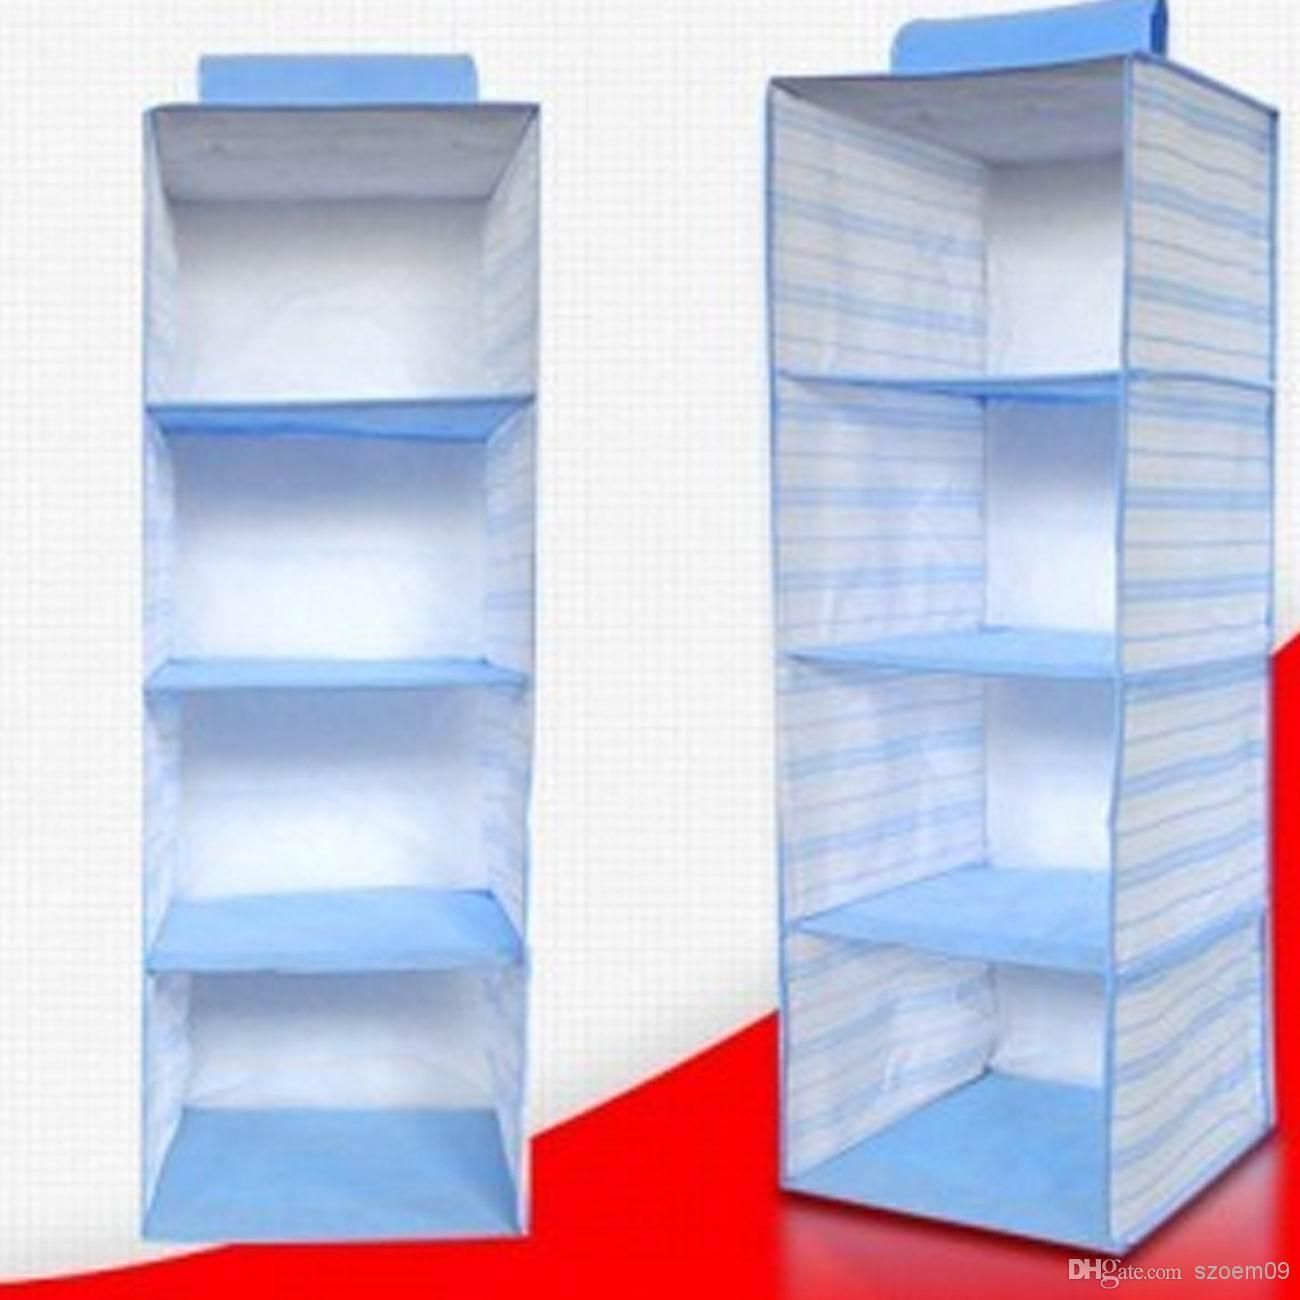 5 Pocket Hanging Organizer Folding Tier Clothes Shoes Shelf Rack Intended For Hanging Wardrobe Shelves (View 14 of 25)